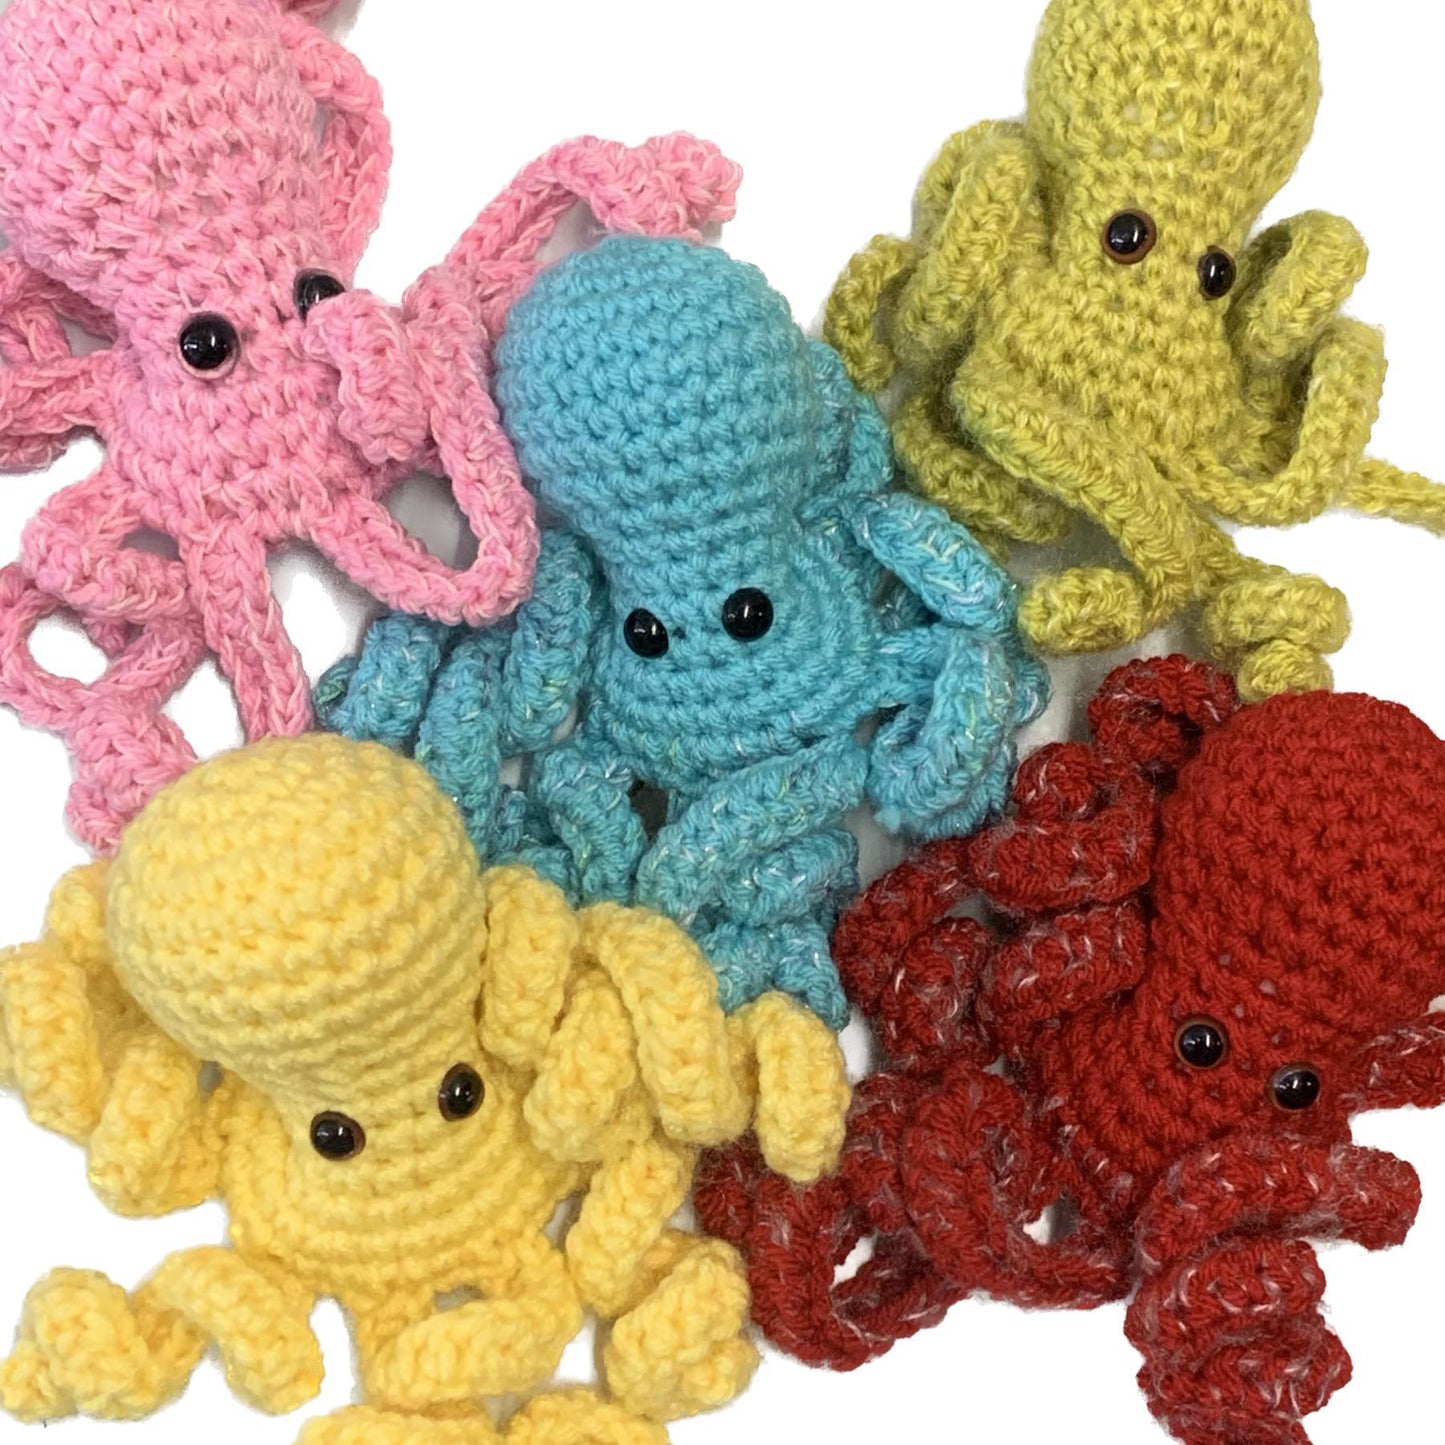 BEAKNITS- CROCHETED OCTOPUS - Light Pink with Pale Blue